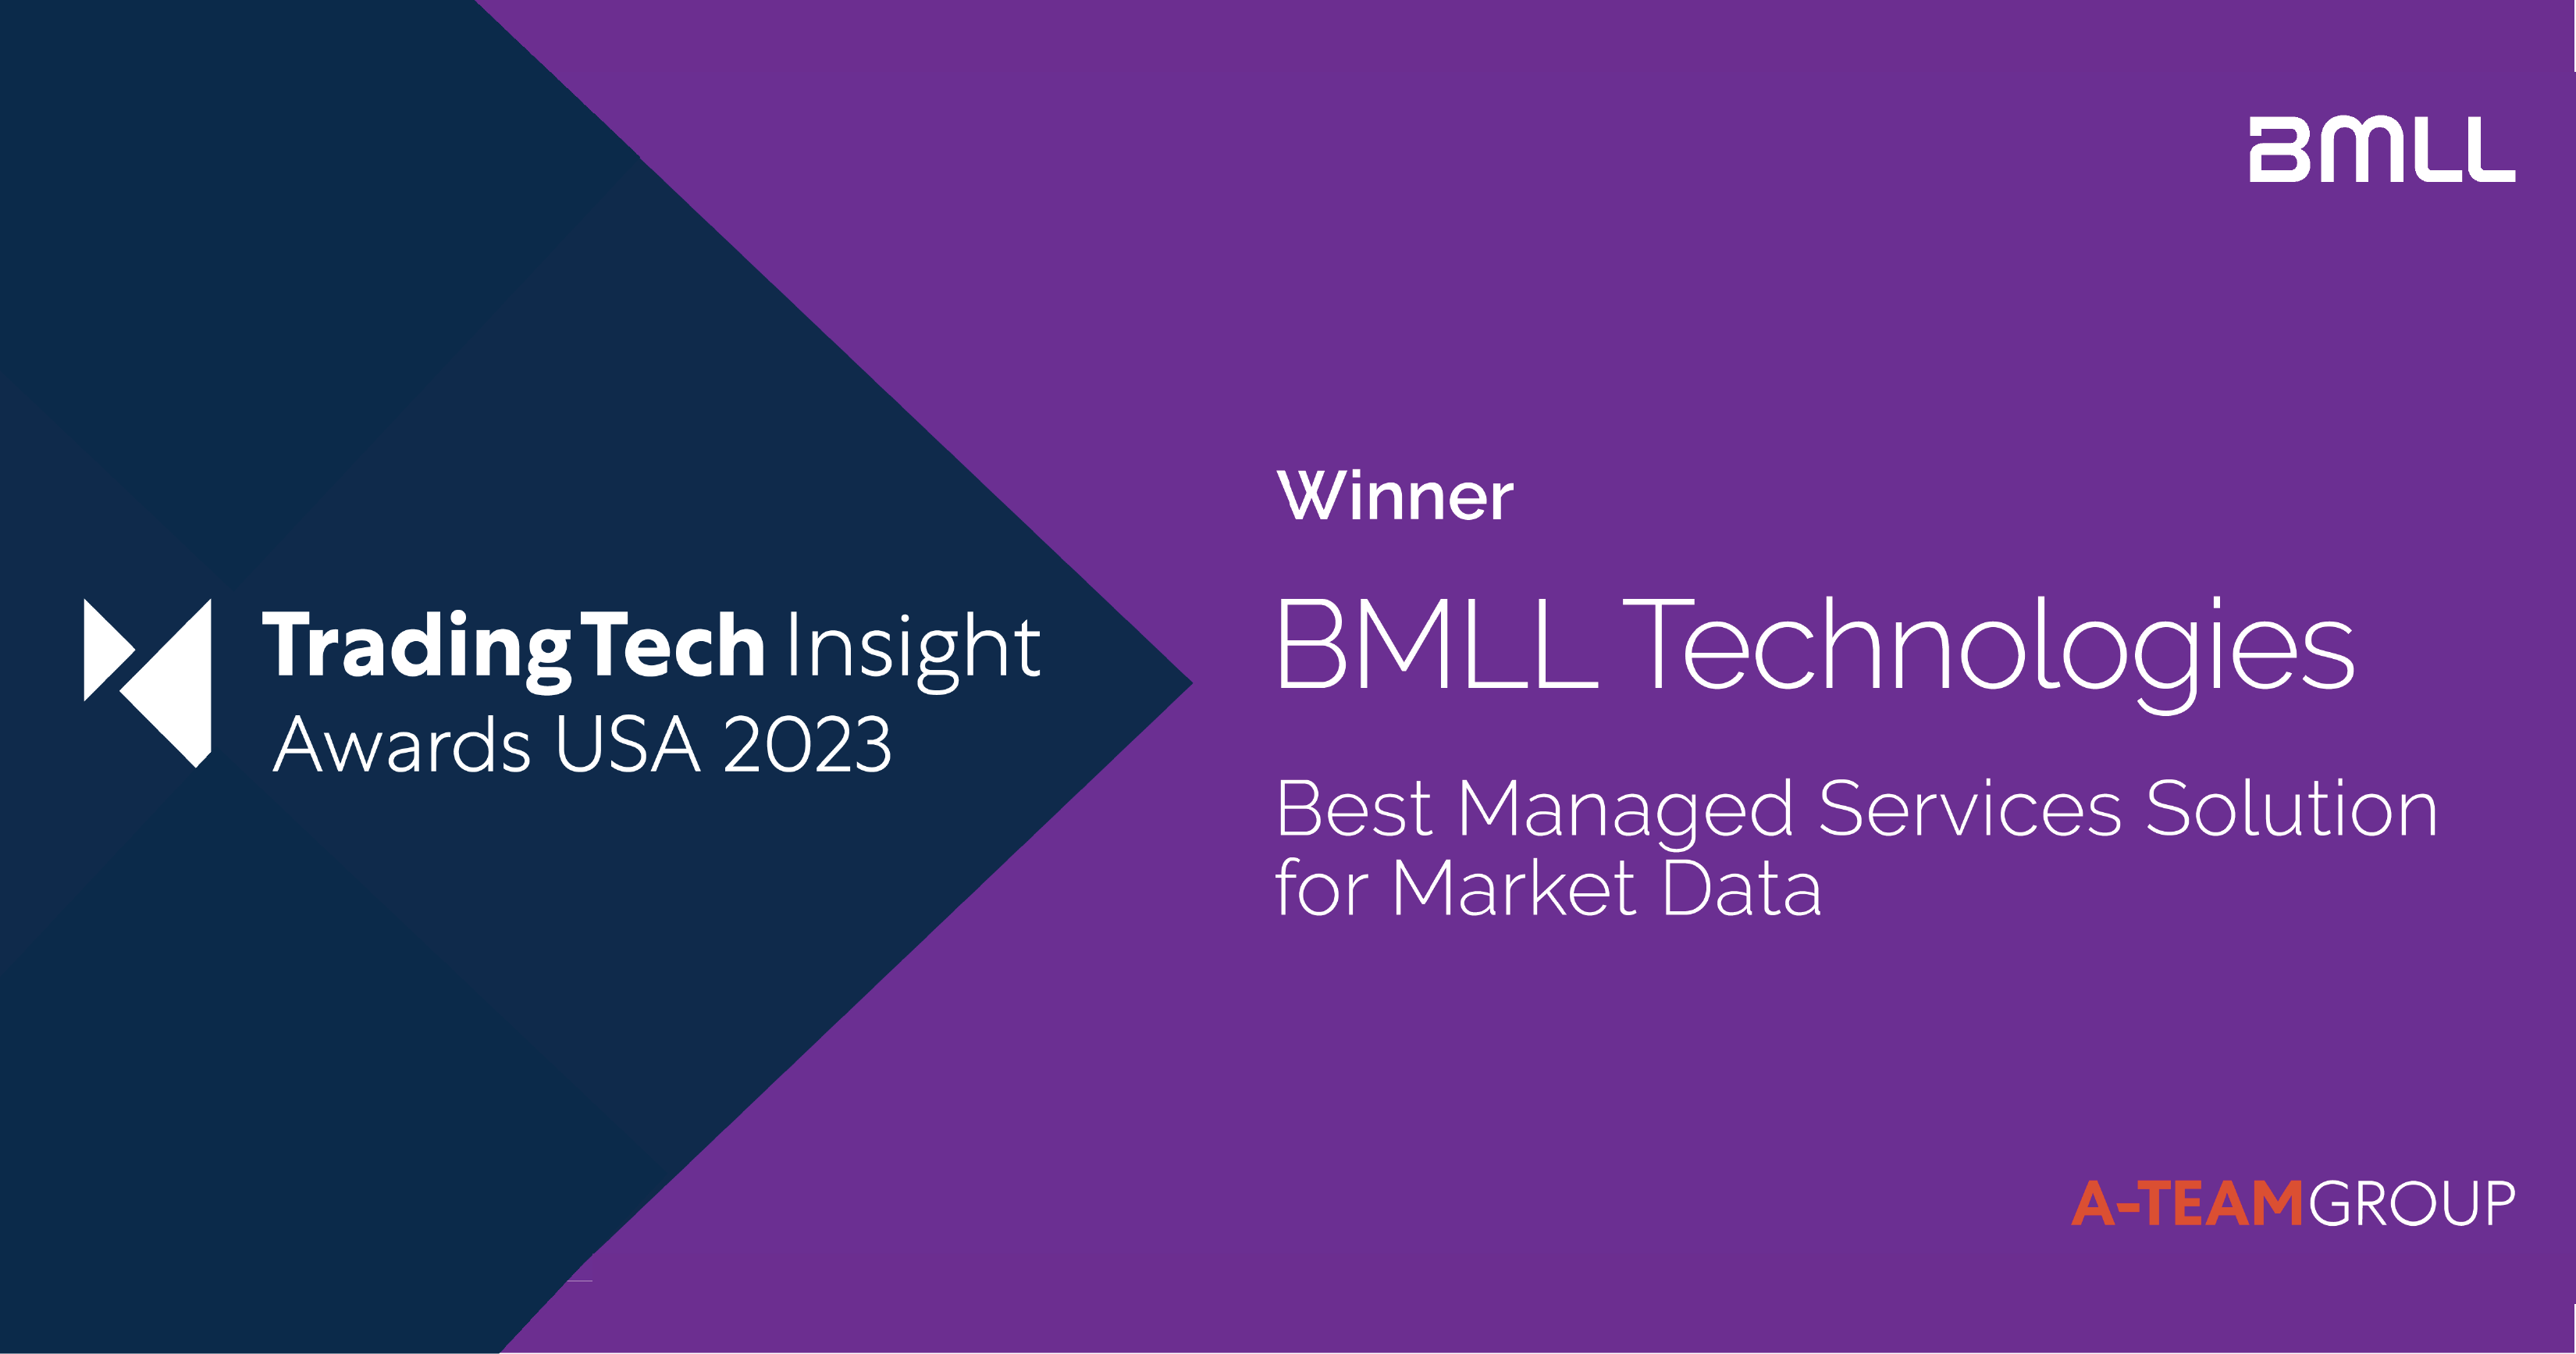 Photo for BMLL Wins ‘Best Managed Services Solution for Market Data’ at the TradingTech Insight USA Awards 2023 news story